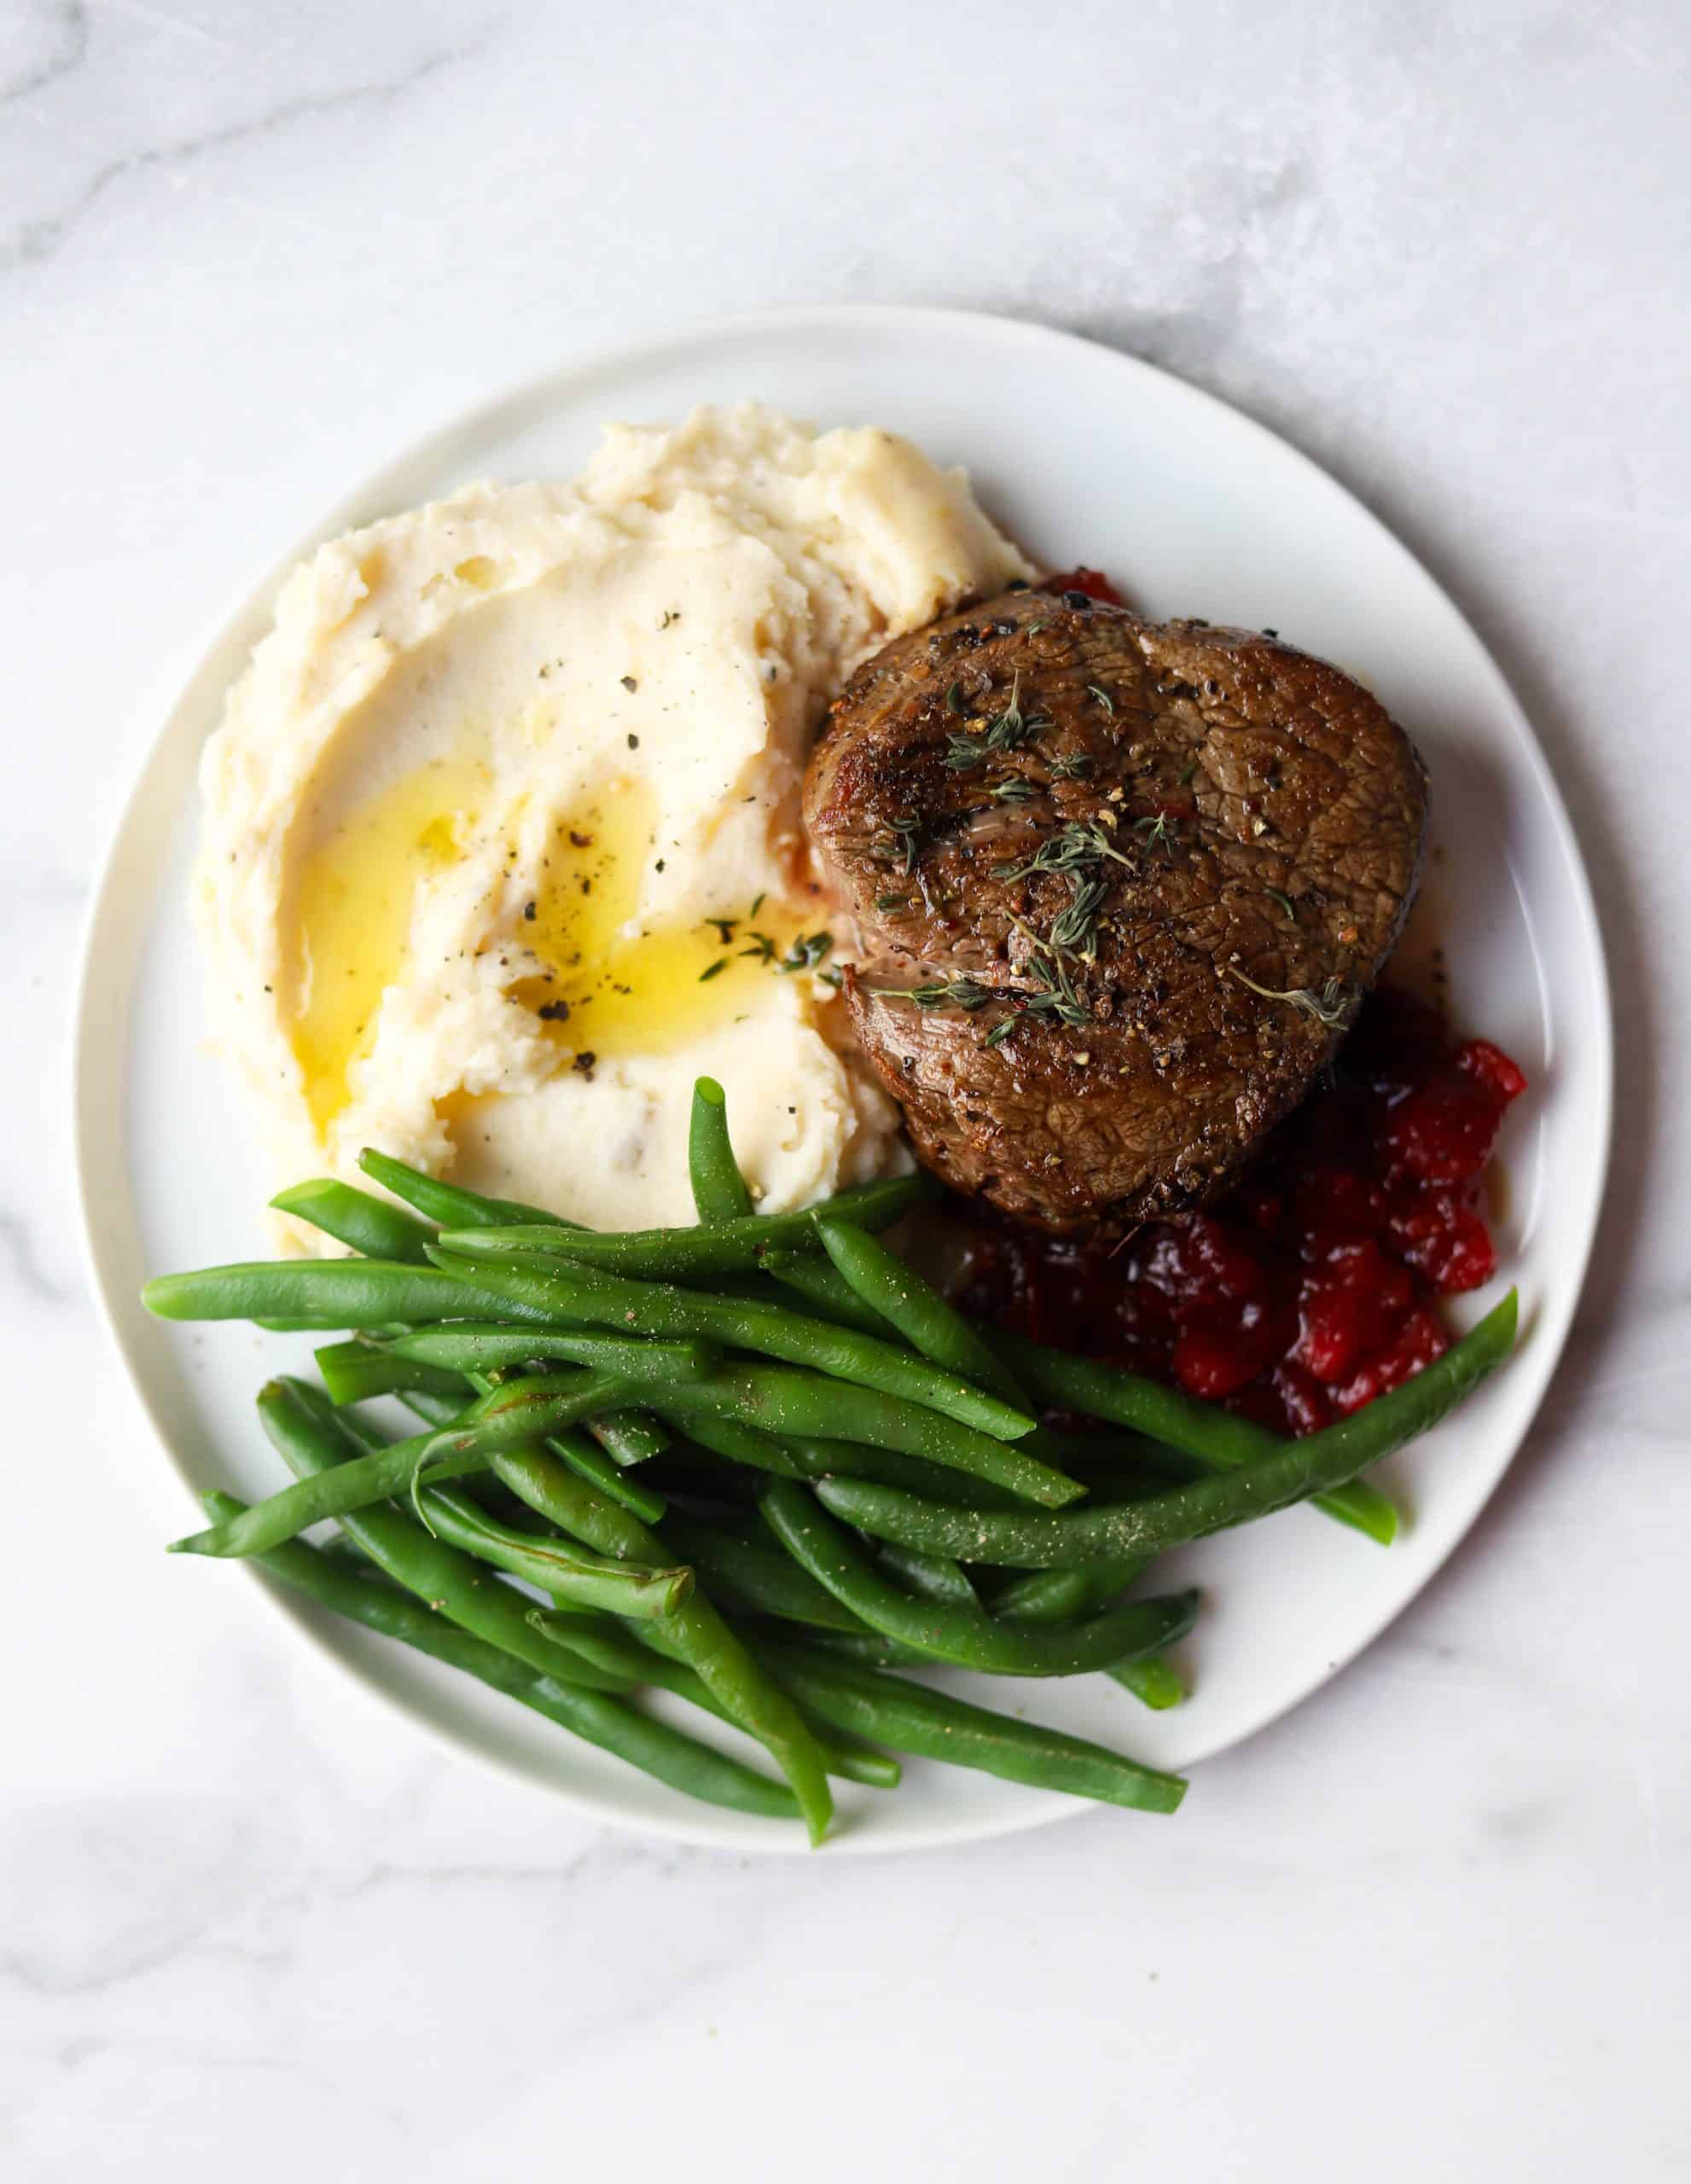 Beef tenderloin, green beans, mashed potatoes and cranberry compote on a white plate